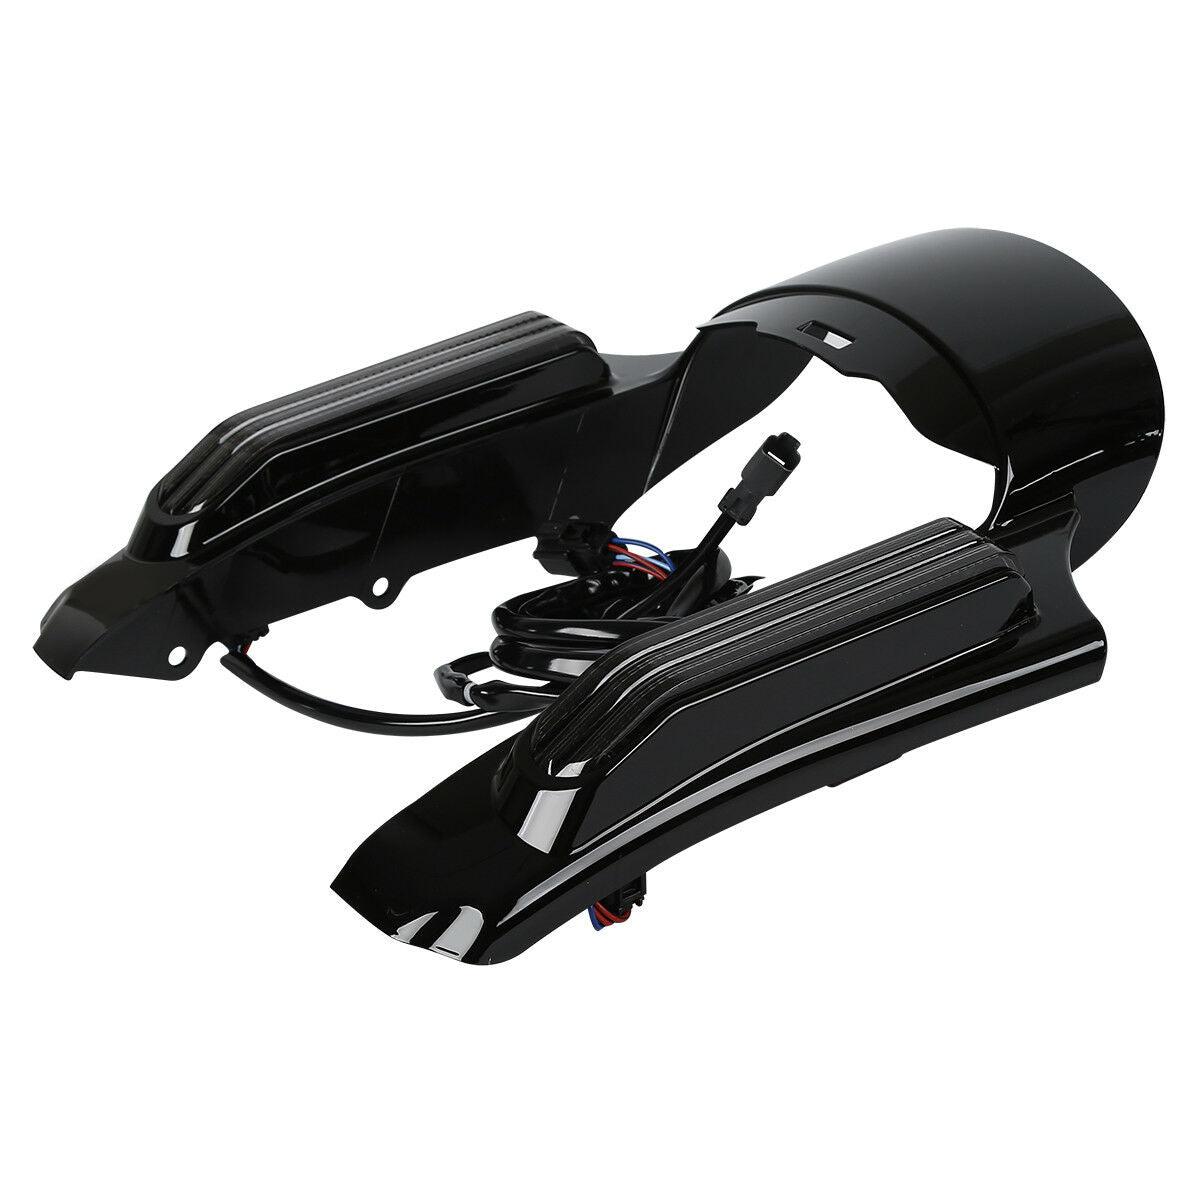 Rear Fender Fascia For Harley Davidson Touring Street Glide 2014-2022 2019 2018 - Moto Life Products